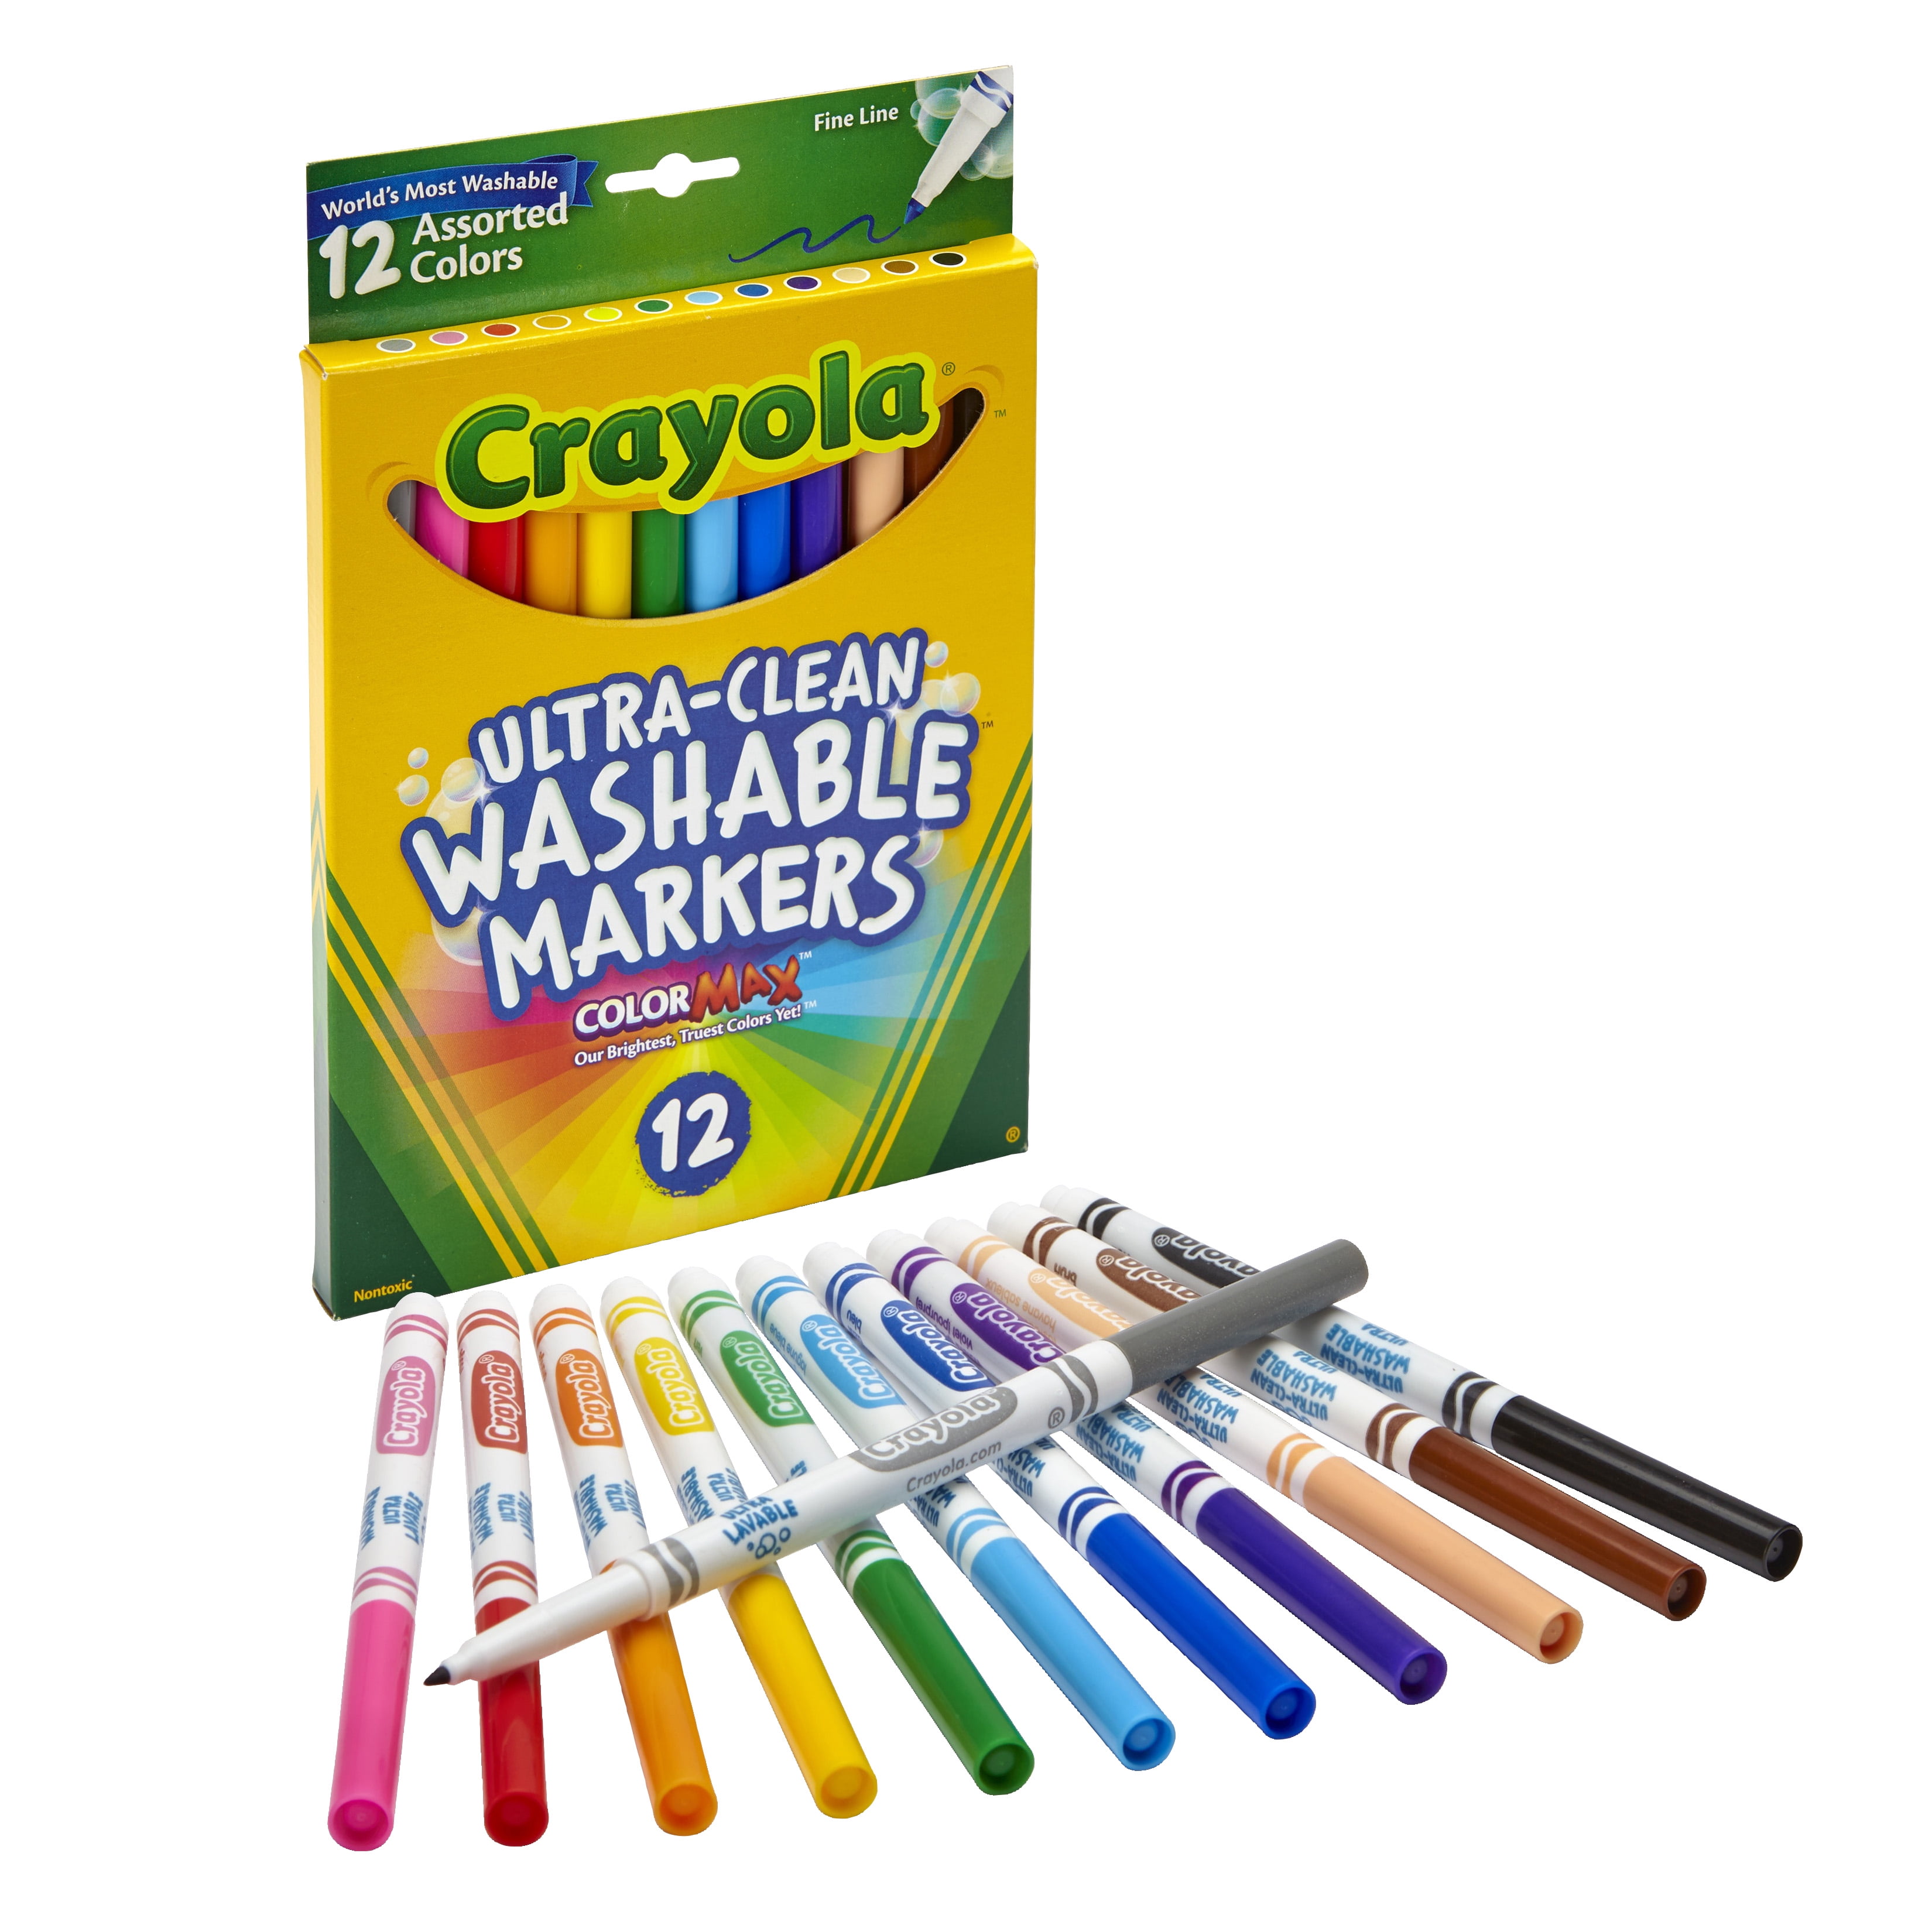 Crayola 58-7713 Fineline Markers 12 Vibrant Colors with Fine Tips 